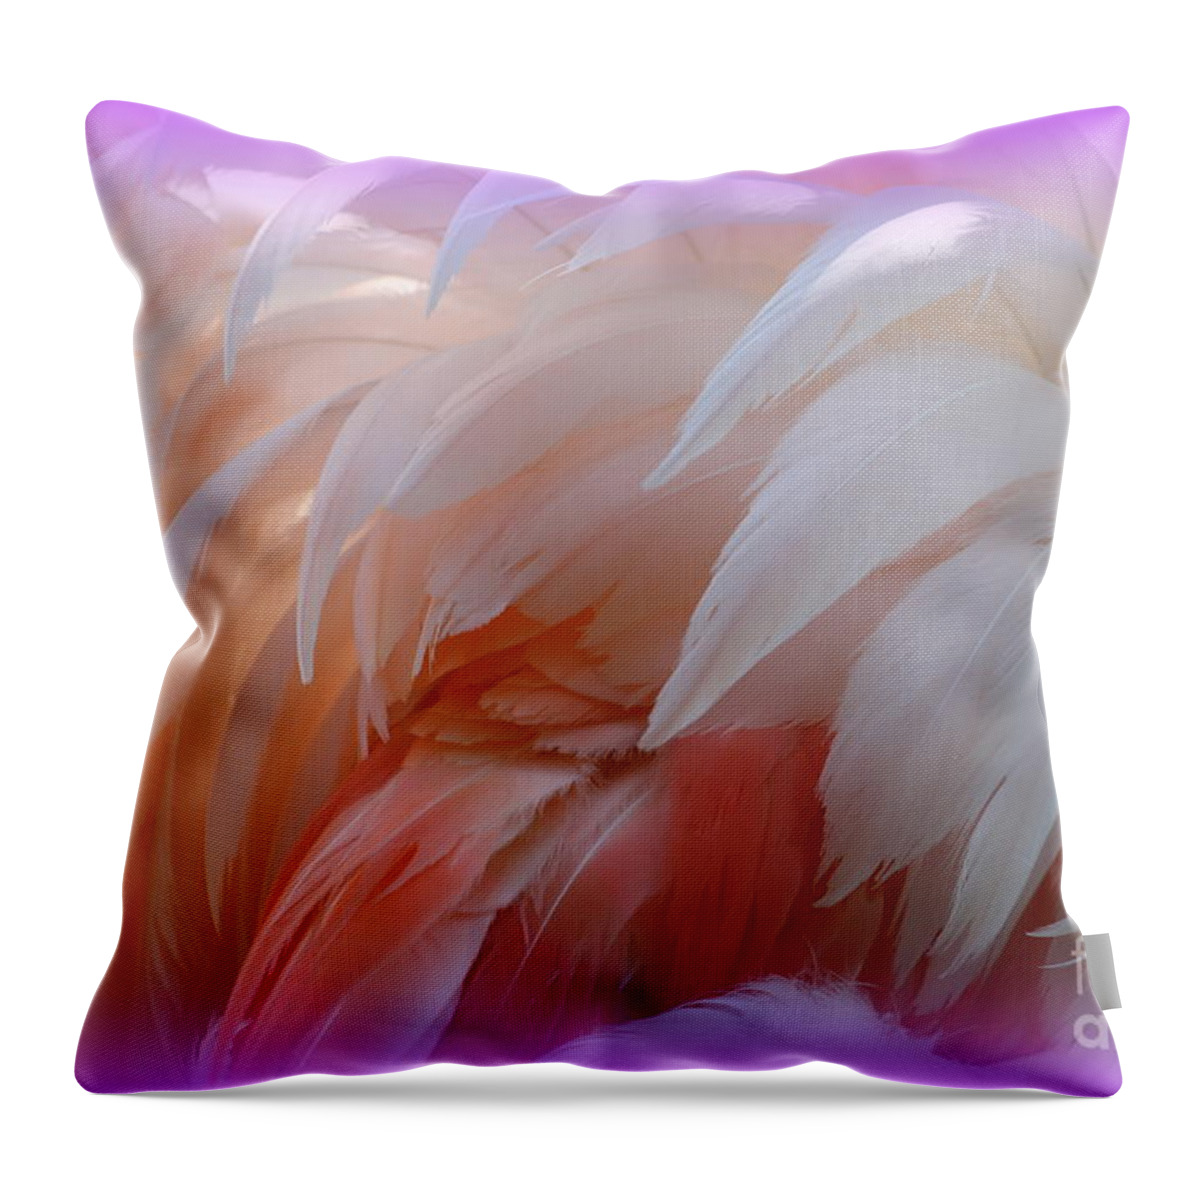 Flamingo Throw Pillow featuring the photograph Flamingo Feathers by Rick Rauzi